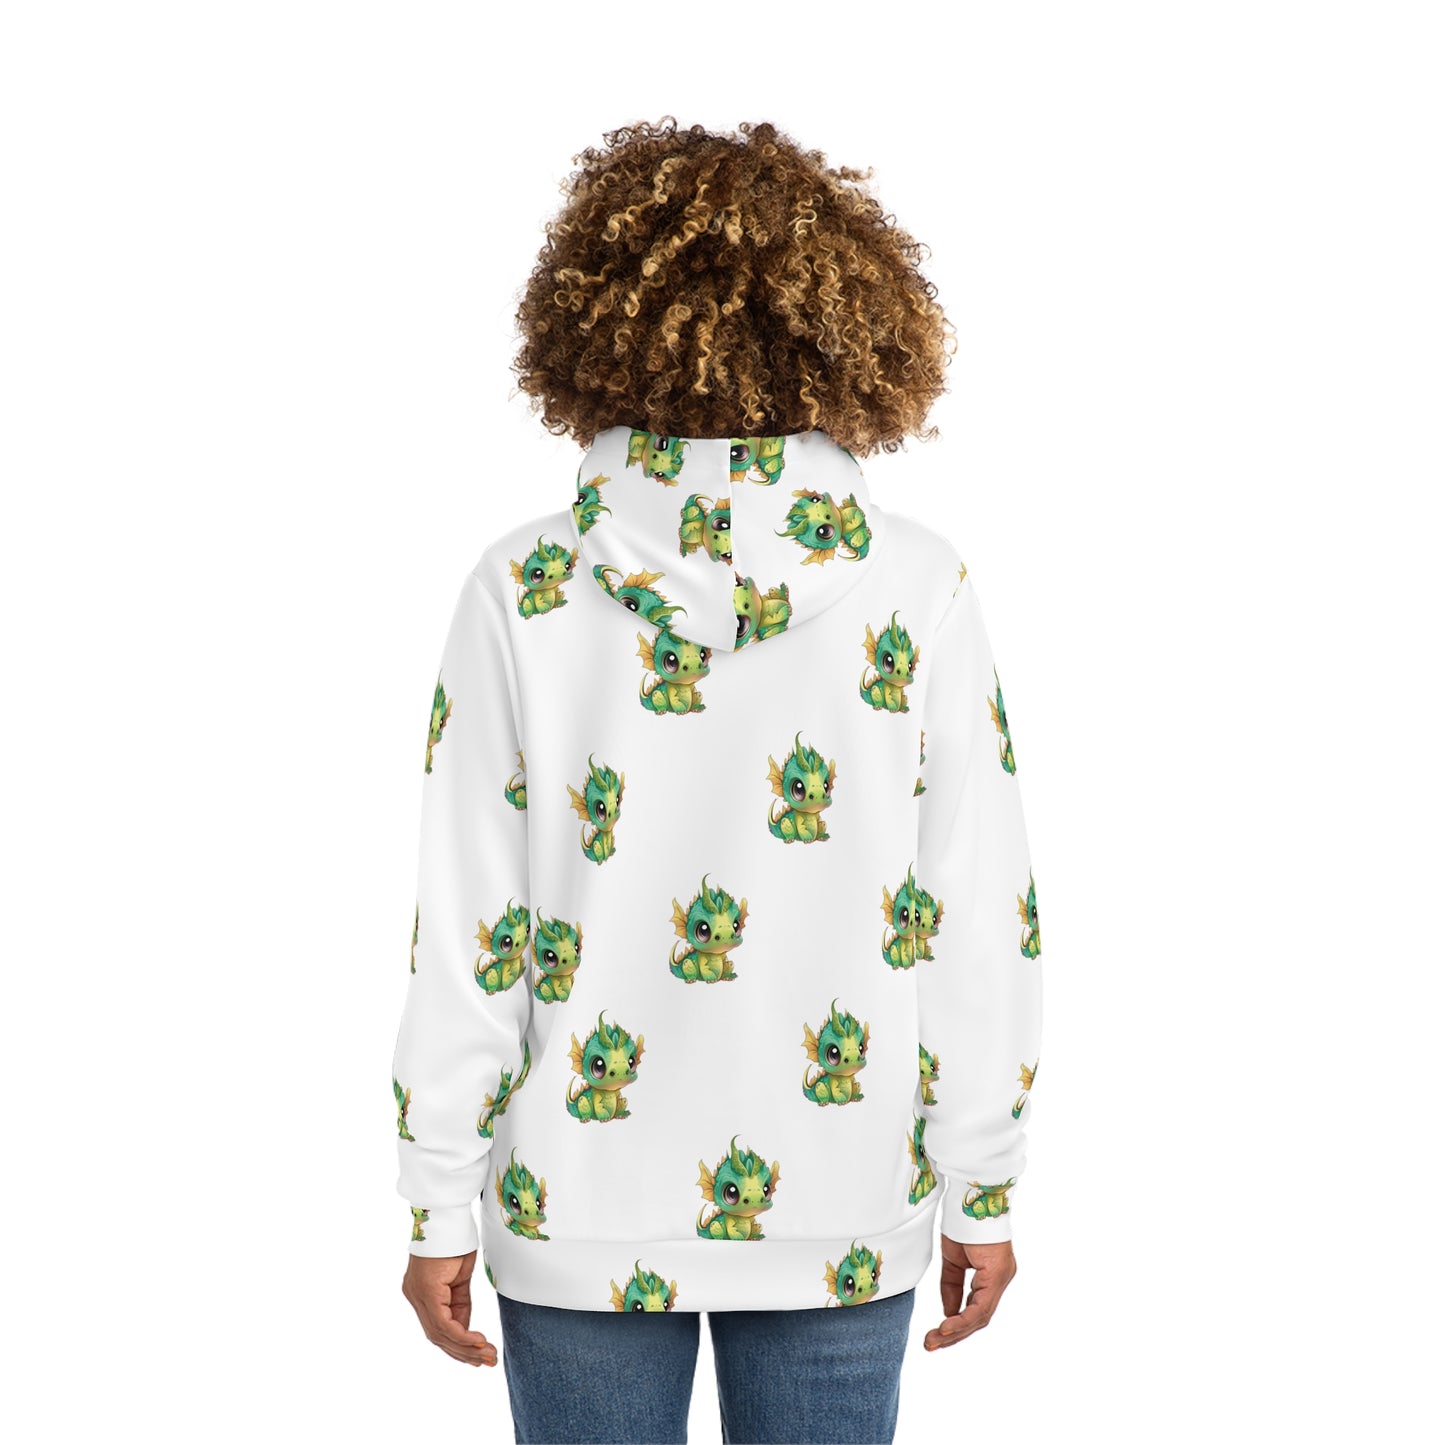 On a hoodie with a large front pocke sits a cute baby Bobby Dragon in greens yellows and a green baby horn - he is all over the hoody about 3 inches tall and 3 inches away from each other on this all over print hoody. 